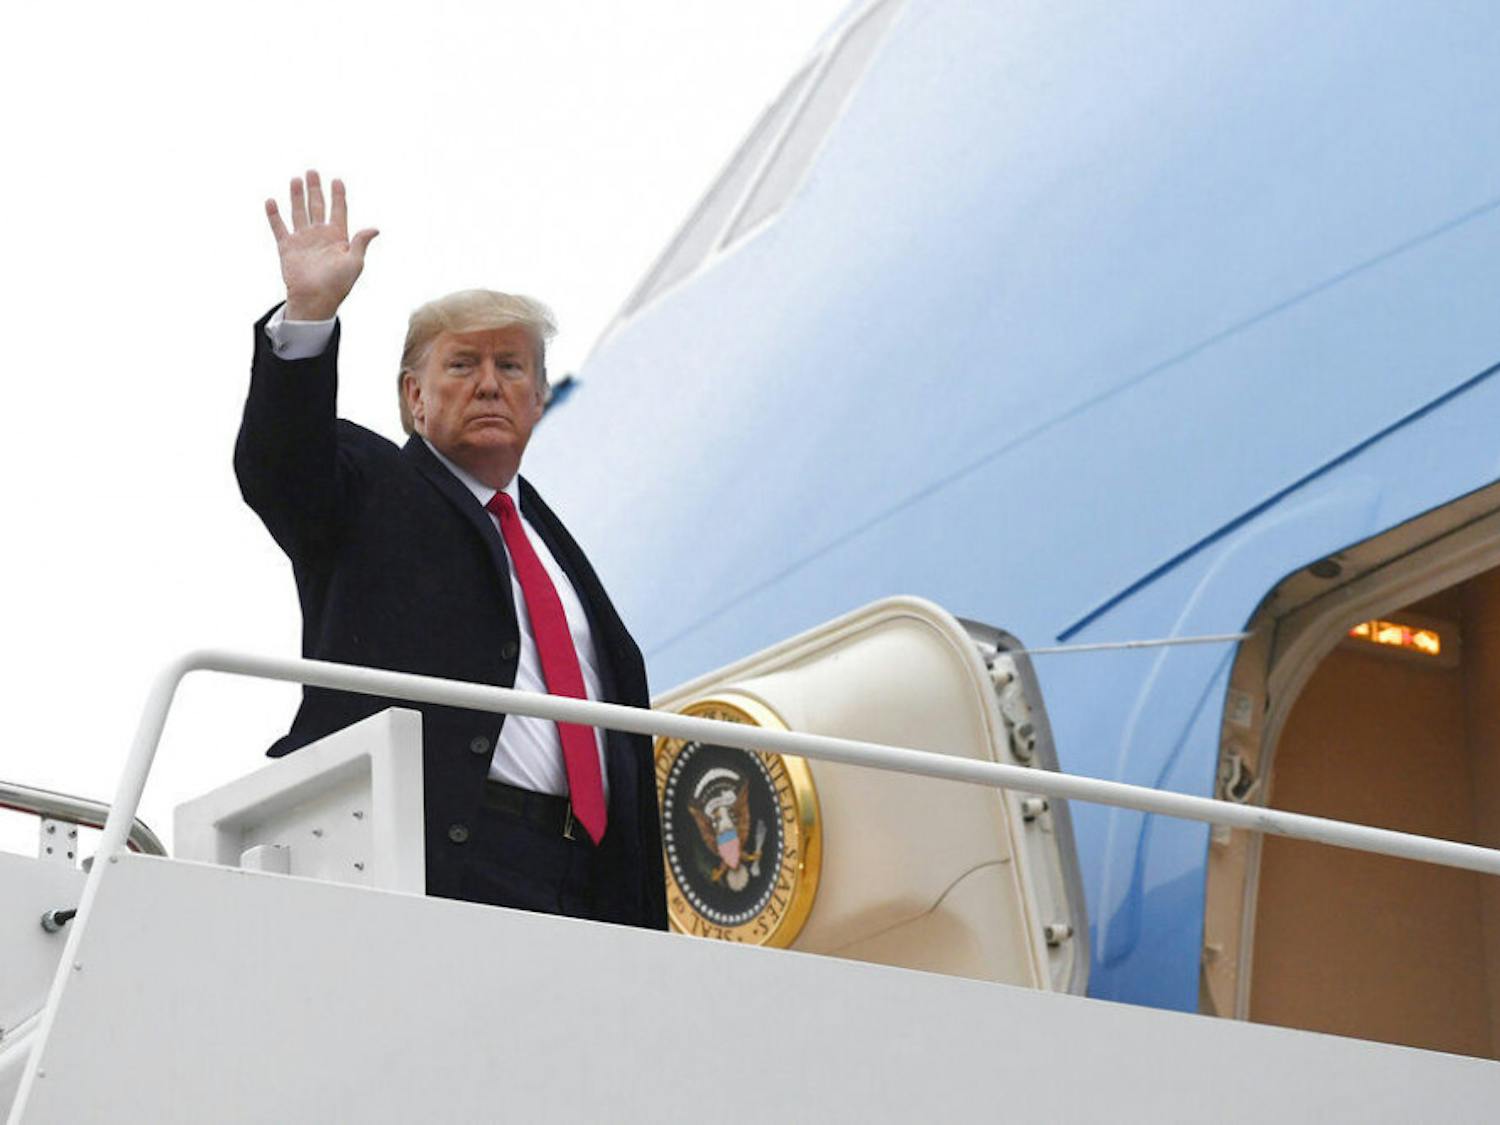 President Donald Trump waves from the top of the steps of Air Force One at Andrews Air Force Base in Md., Friday, Jan. 31, 2020. (AP Photo/Susan Walsh)